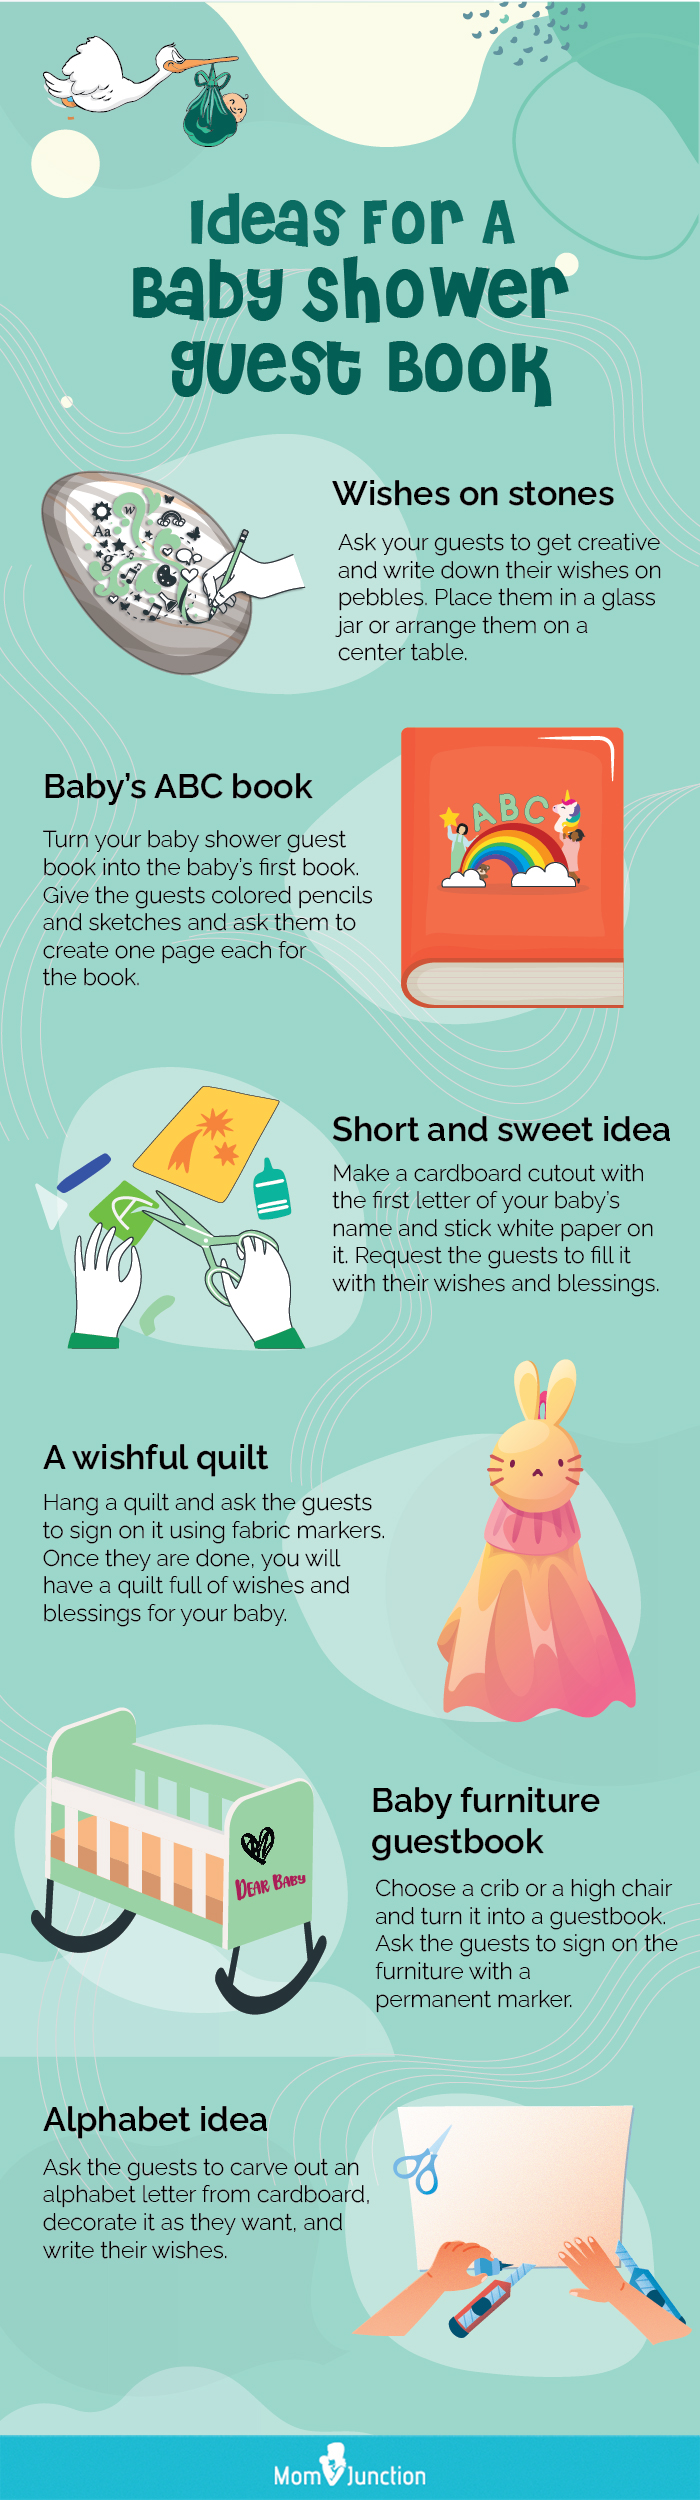 ideas for a baby shower guest book [infographic]